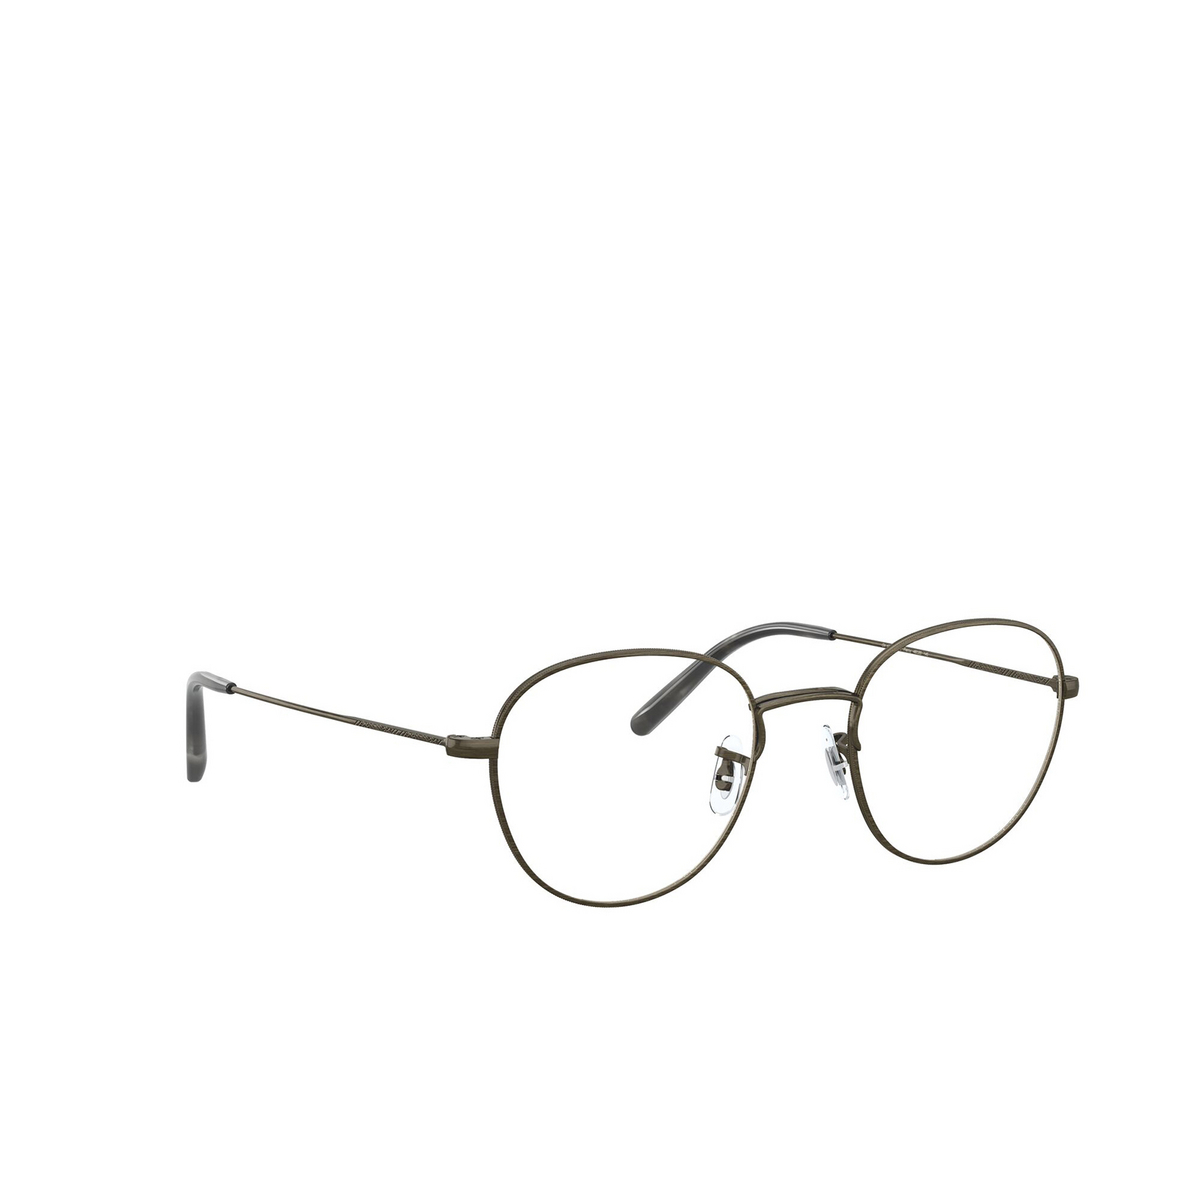 Oliver Peoples® Round Eyeglasses: Piercy OV1281 color Antique Pewter 5289 - three-quarters view.